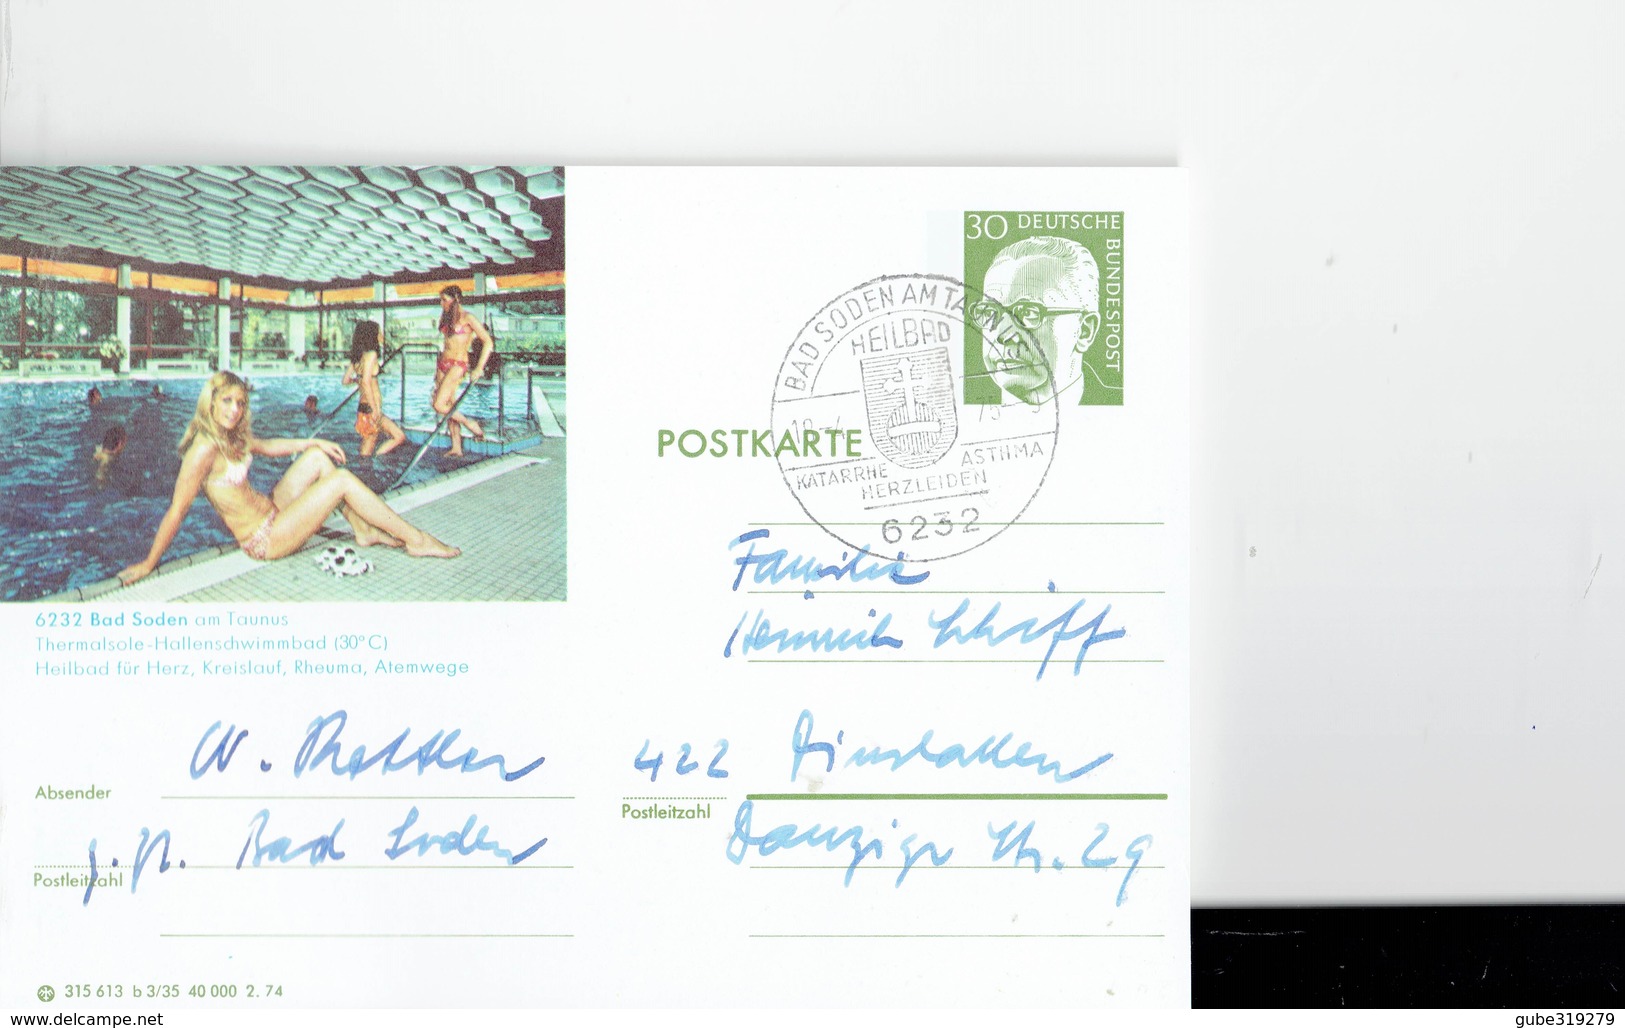 GERMANY 1975 - BAD SODEN AM TAUNUS  - POSTKARTE - OBLITER. O,30 DM STAMP 18.4.19753 - THERMA STADT- THERMALSOLE IMAGE - - Bad Soden